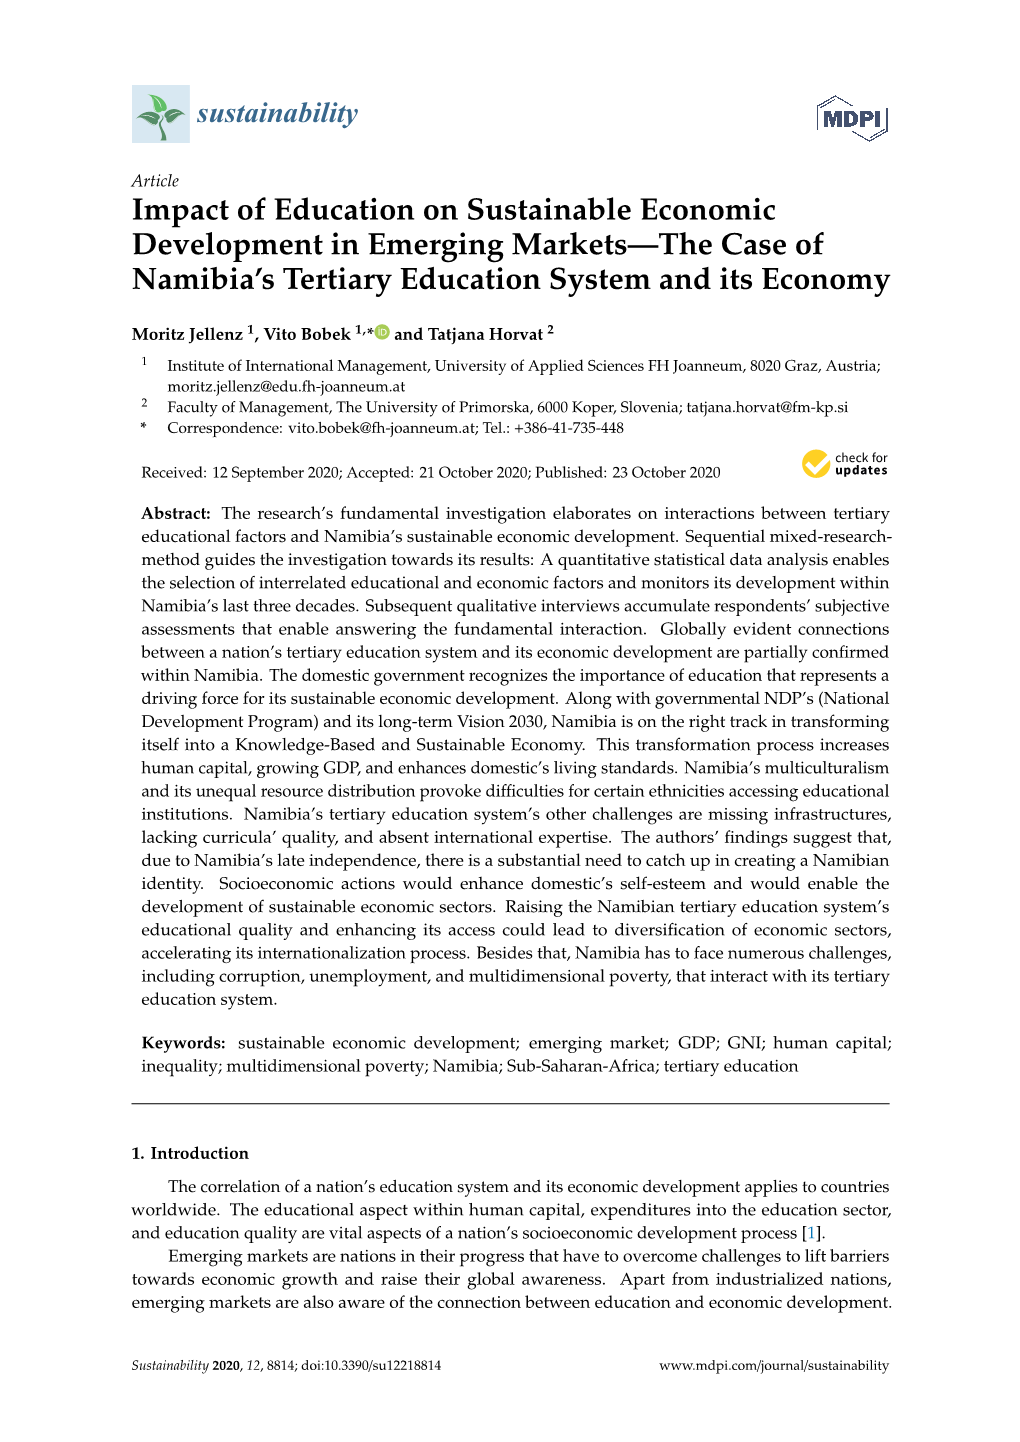 Impact of Education on Sustainable Economic Development in Emerging Markets—The Case of Namibia’S Tertiary Education System and Its Economy